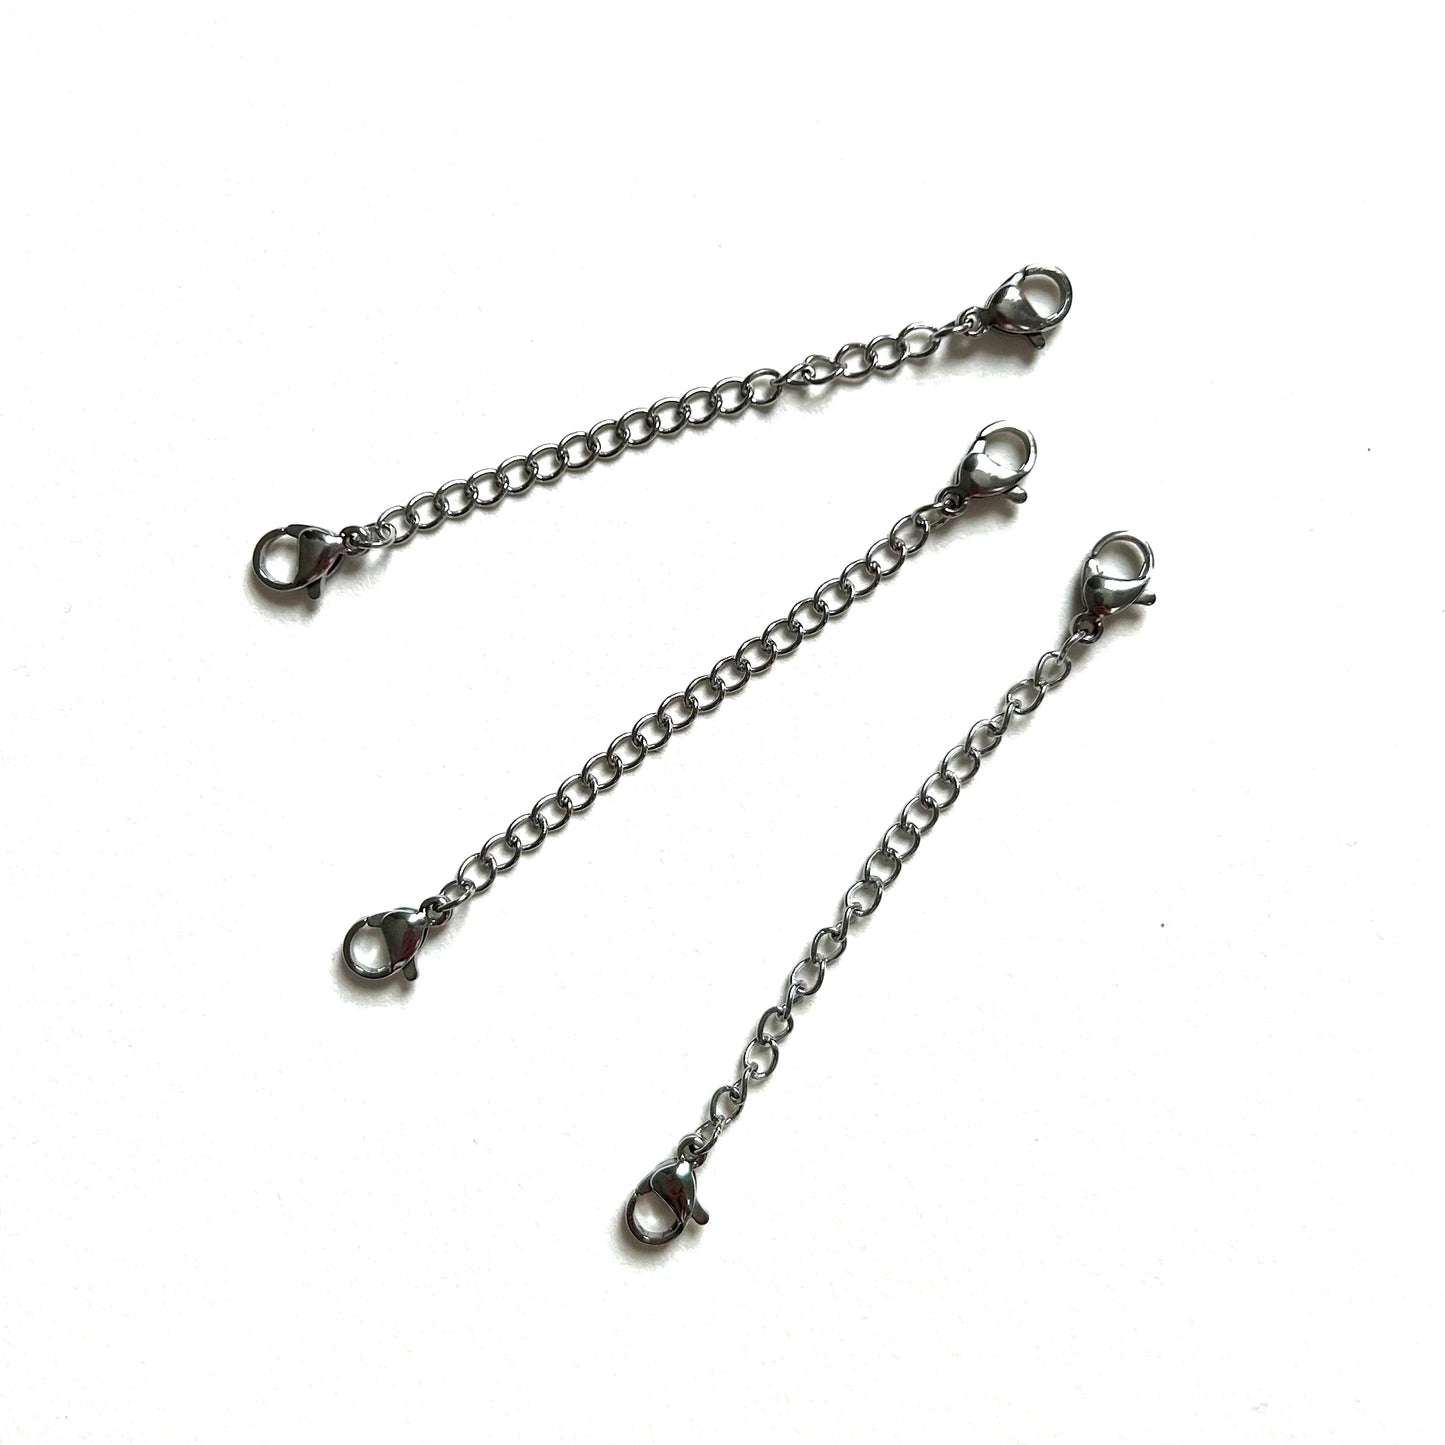 Necklace Extender- stainless steel ✧･ﾟ: *